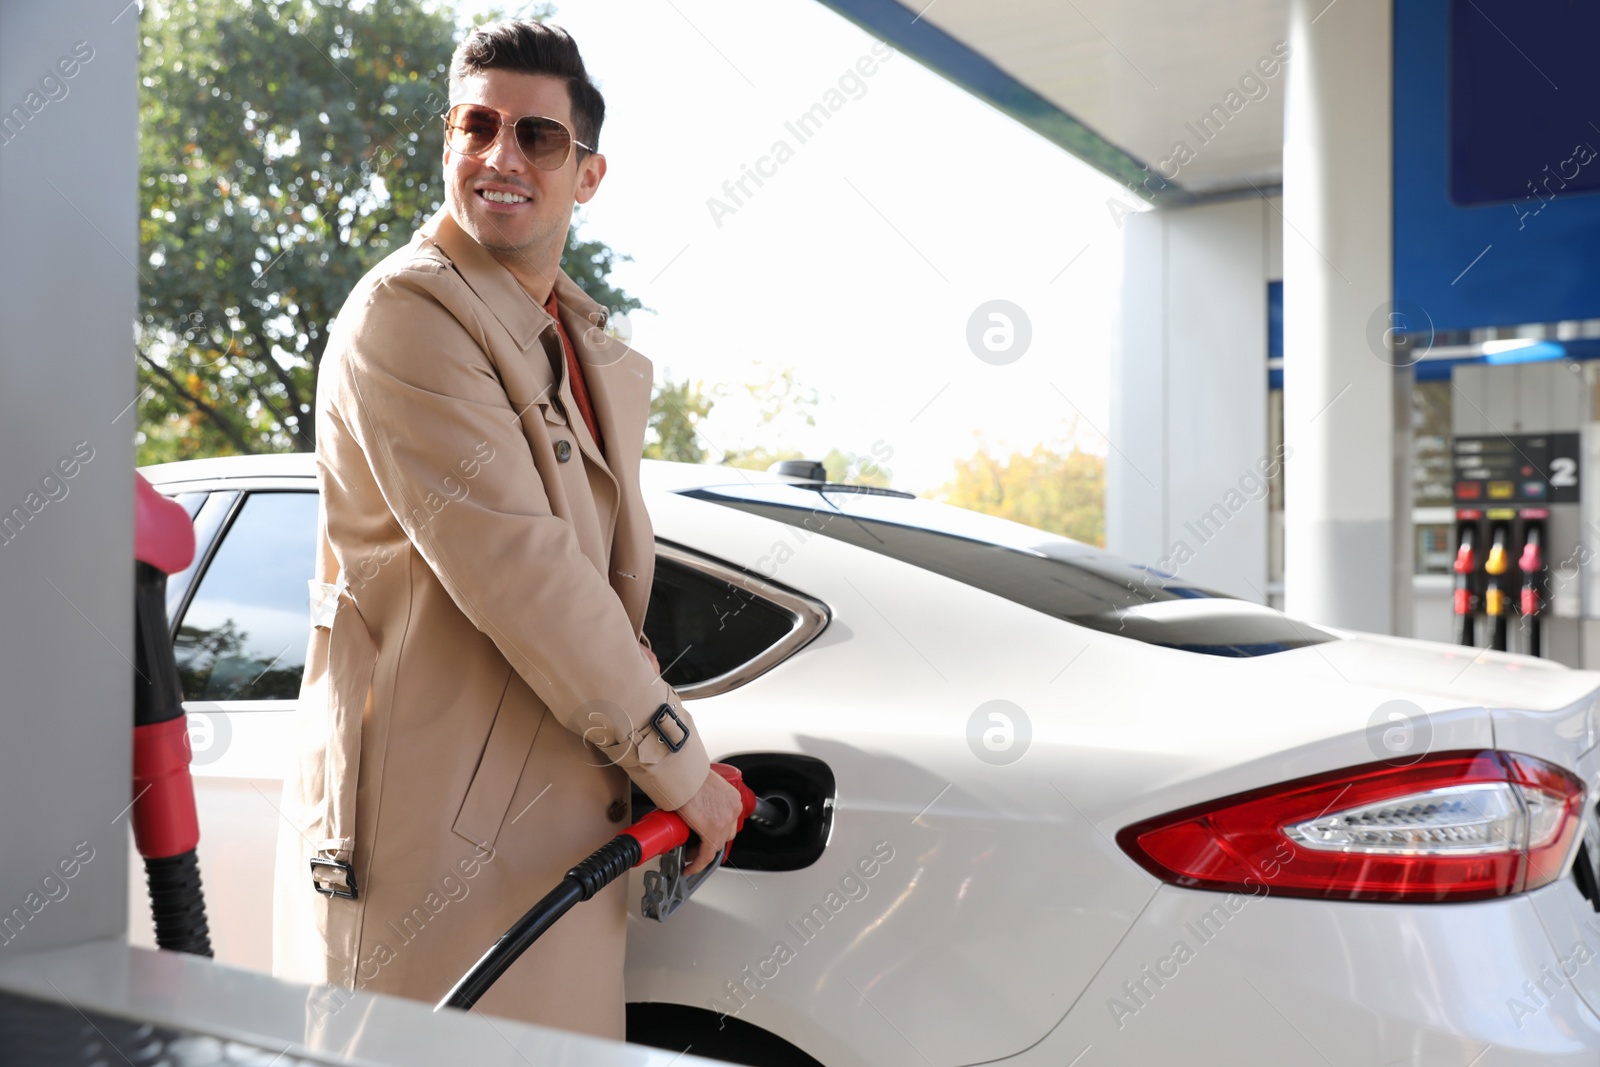 Photo of Man refueling car at self service gas station